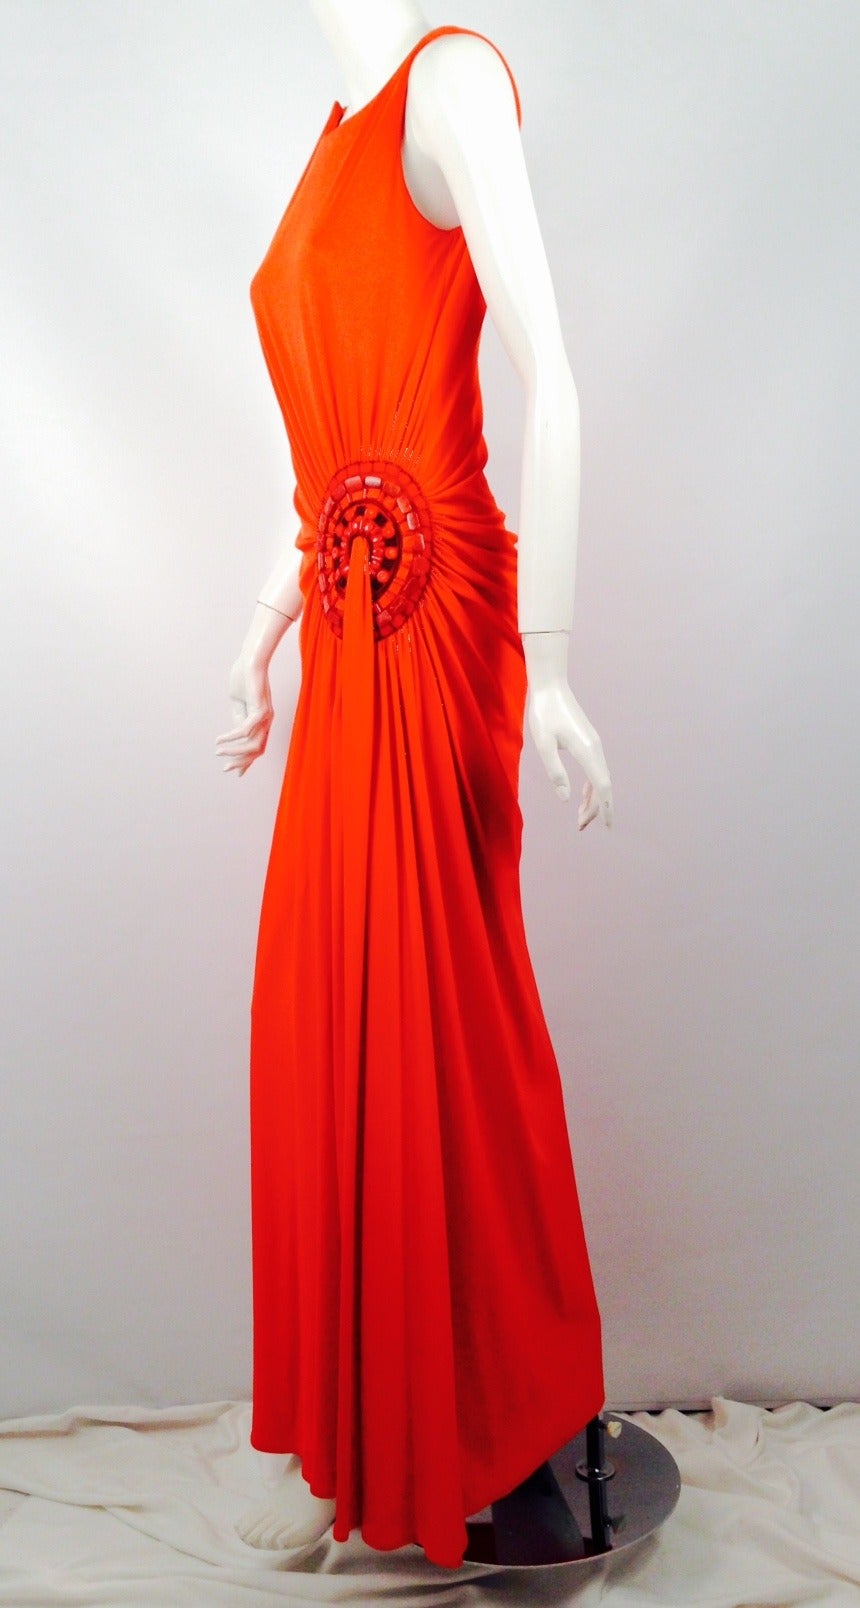 Carolina Herrera Mandarin Orange Draped Evening Dress will leave them all in awe!  Precious silk literally celebrates the natural curves of a woman's body.  Sleeveless dress features exquisite embroidery, elevated beadwork and grosgrain ribbon